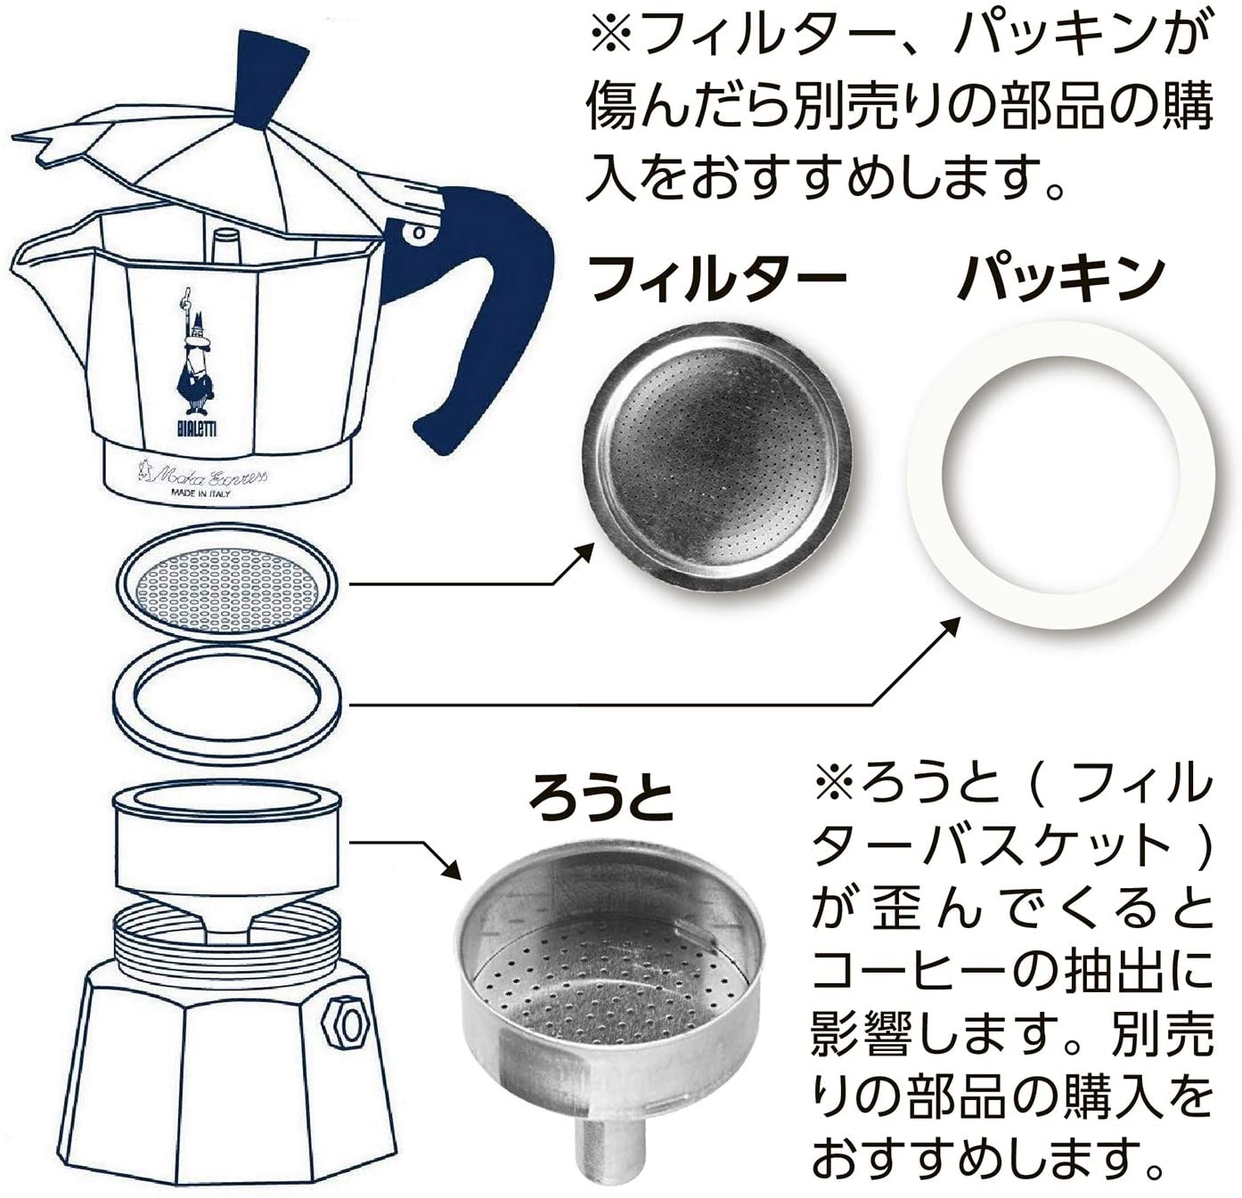 BIALETTI(ビアレッティ) エスプレッソメーカー 直火式の商品画像サムネ3 